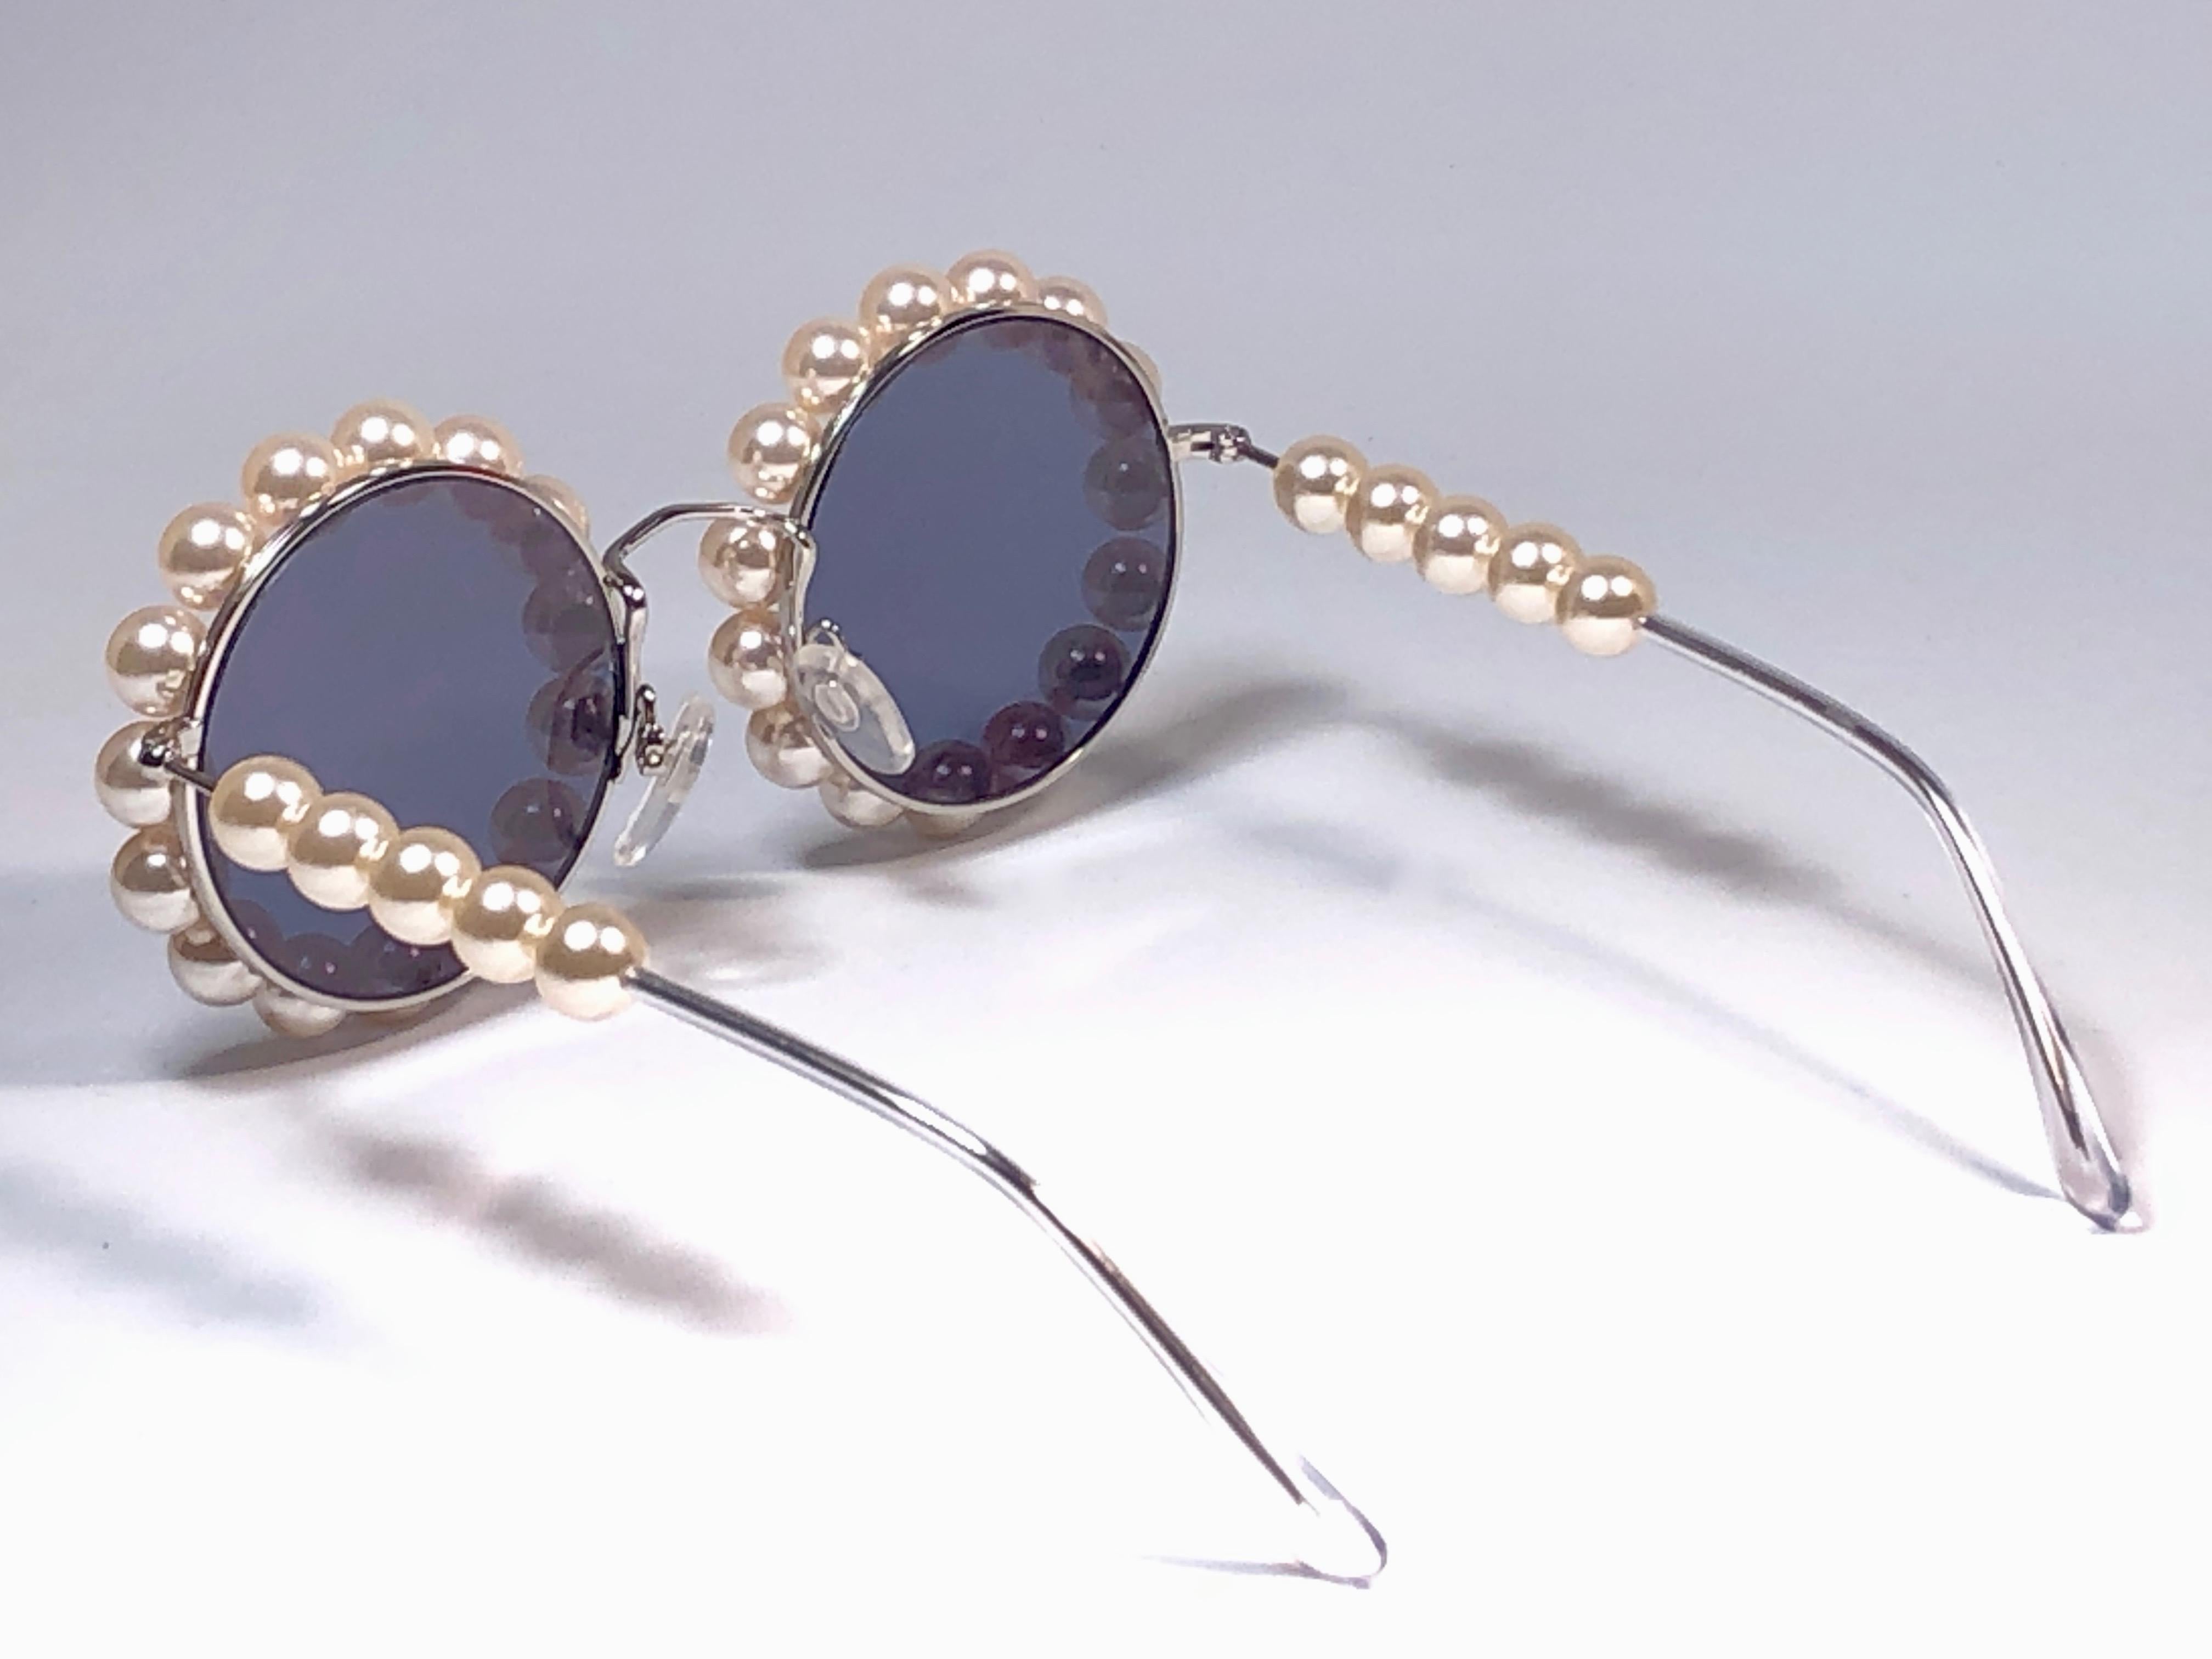 Beige Chanel Vintage Runway Pearls Spring Summer 1994 Sunglasses Made In Italy